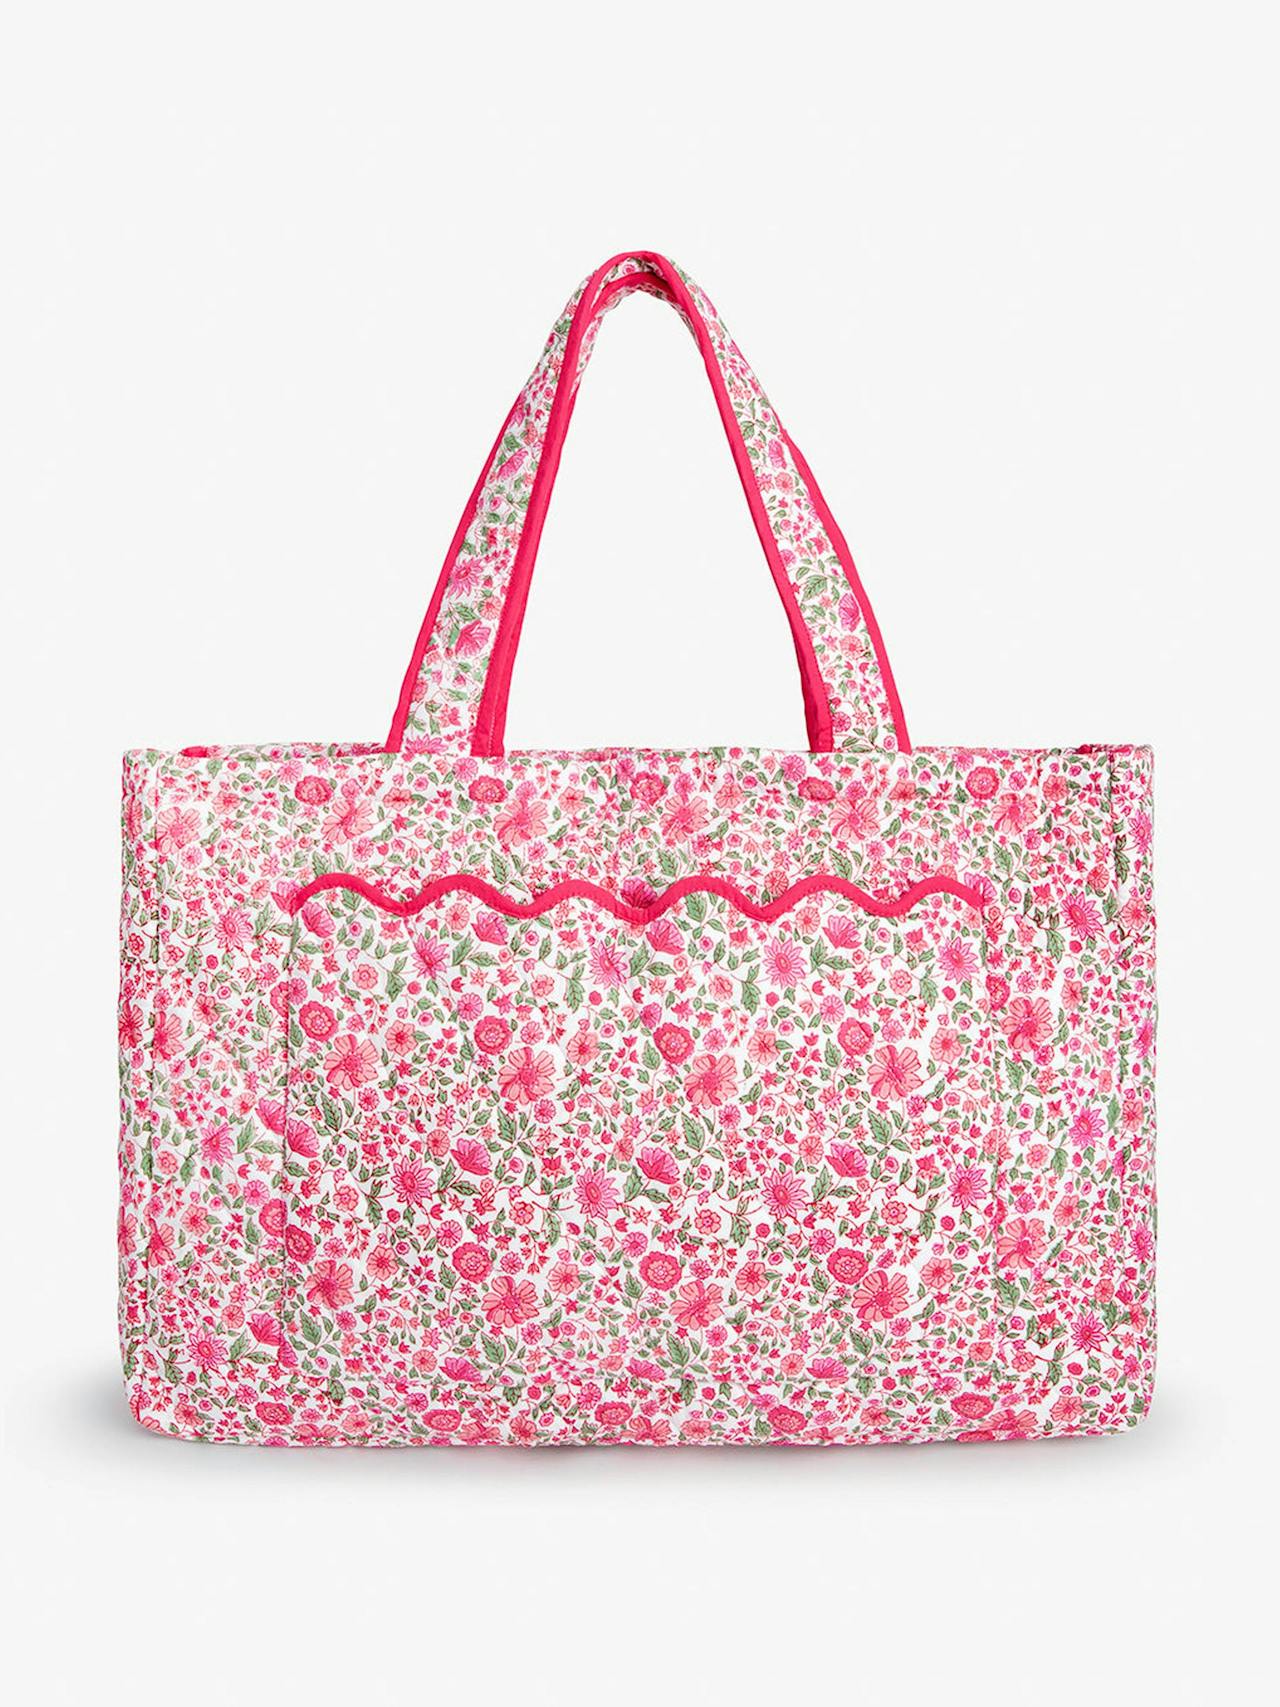 Hollyhock meadow quilted tote bag